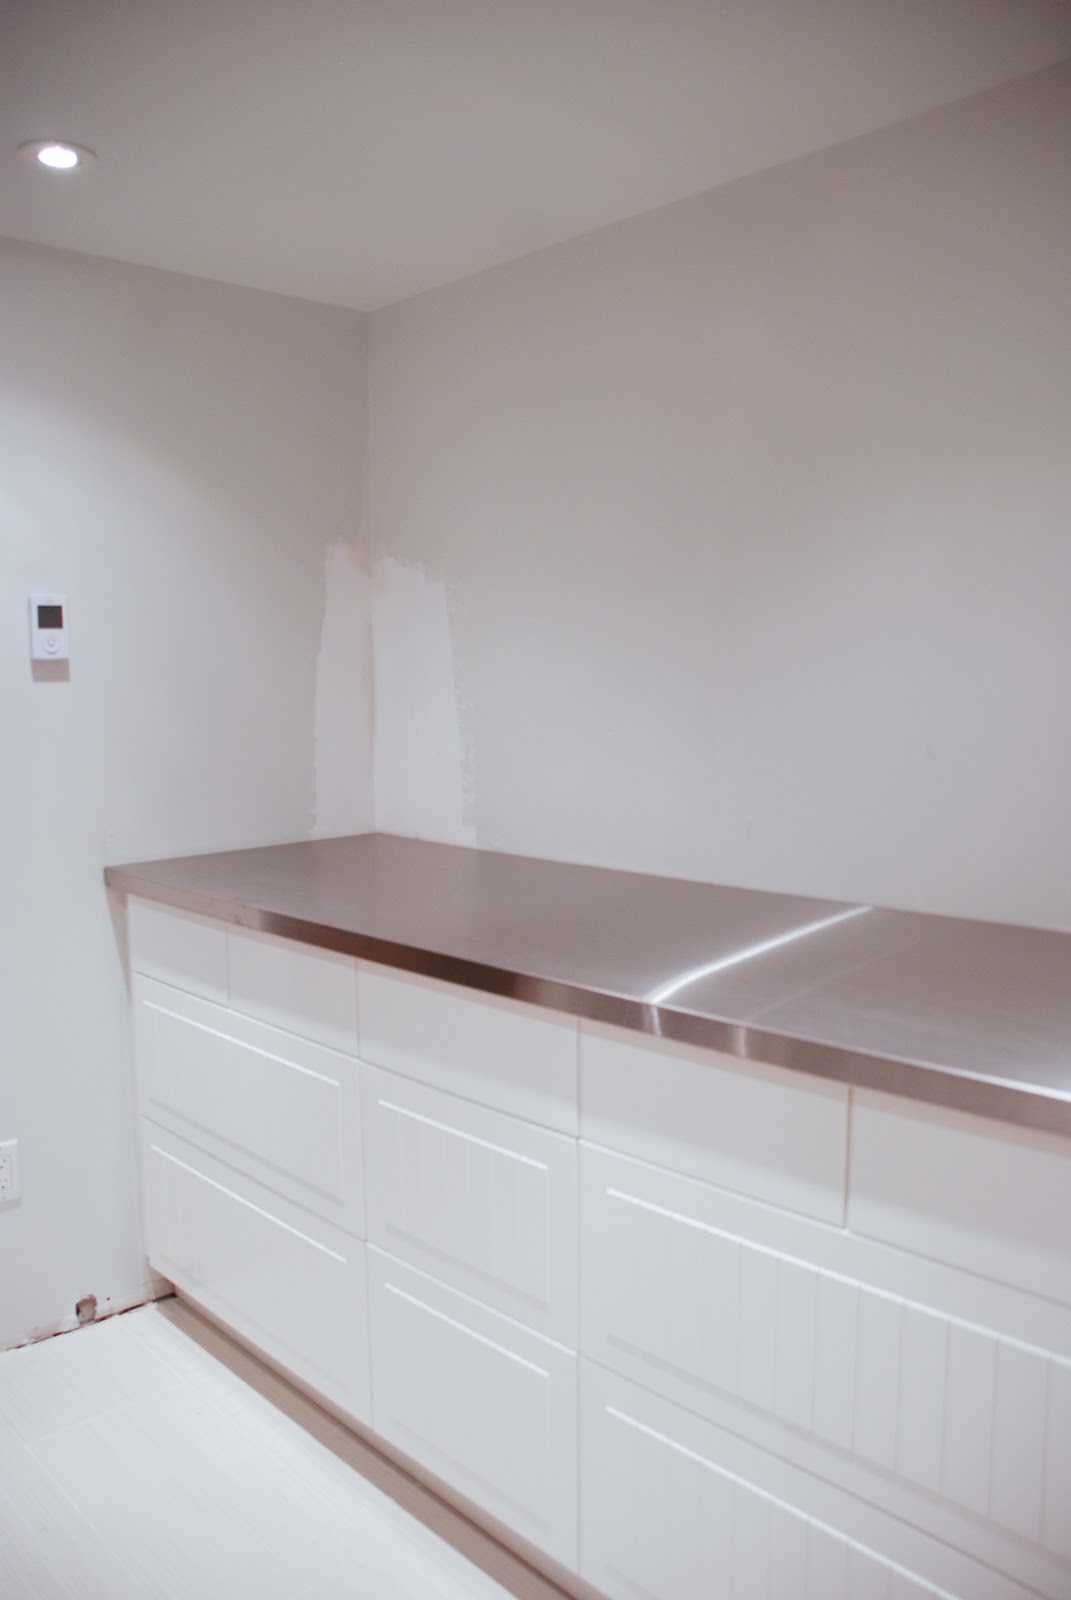 stainless steel countertop in laundry room, floating countertop in laundry room